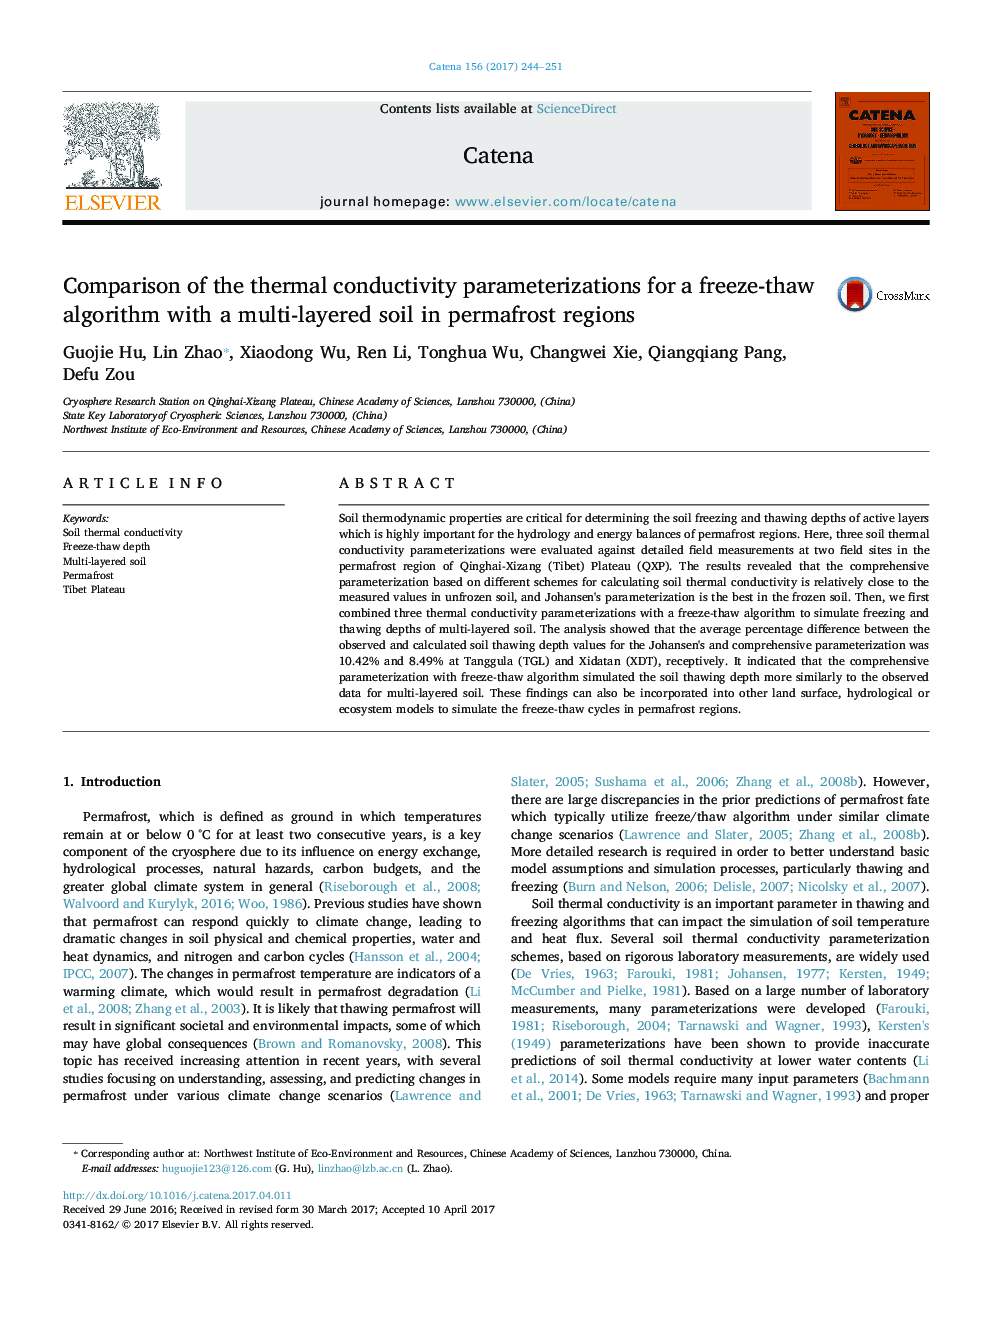 Comparison of the thermal conductivity parameterizations for a freeze-thaw algorithm with a multi-layered soil in permafrost regions